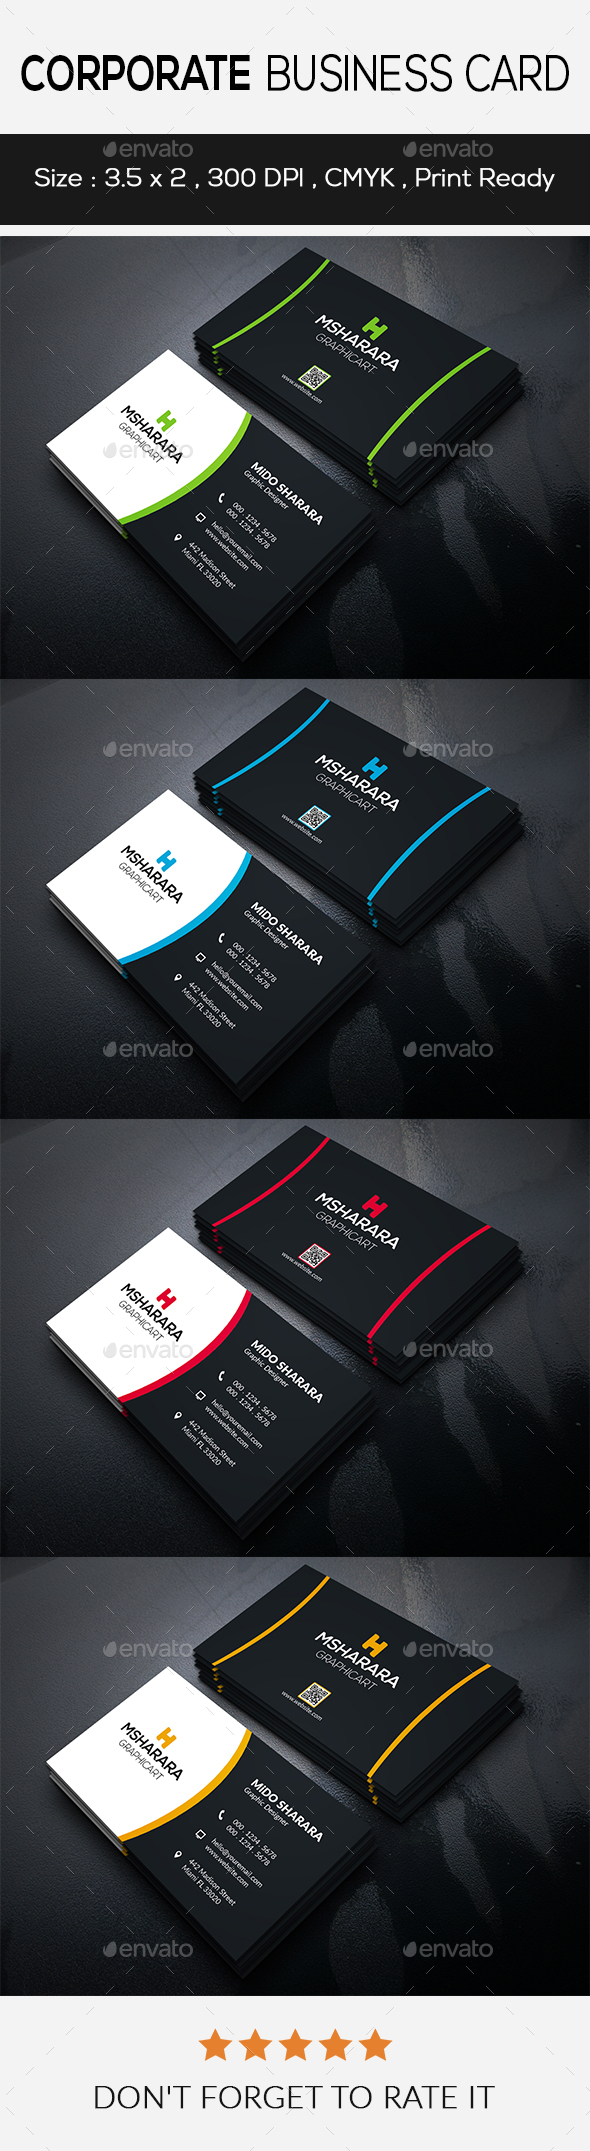 GraphicRiver Corporate Business Card 20890595